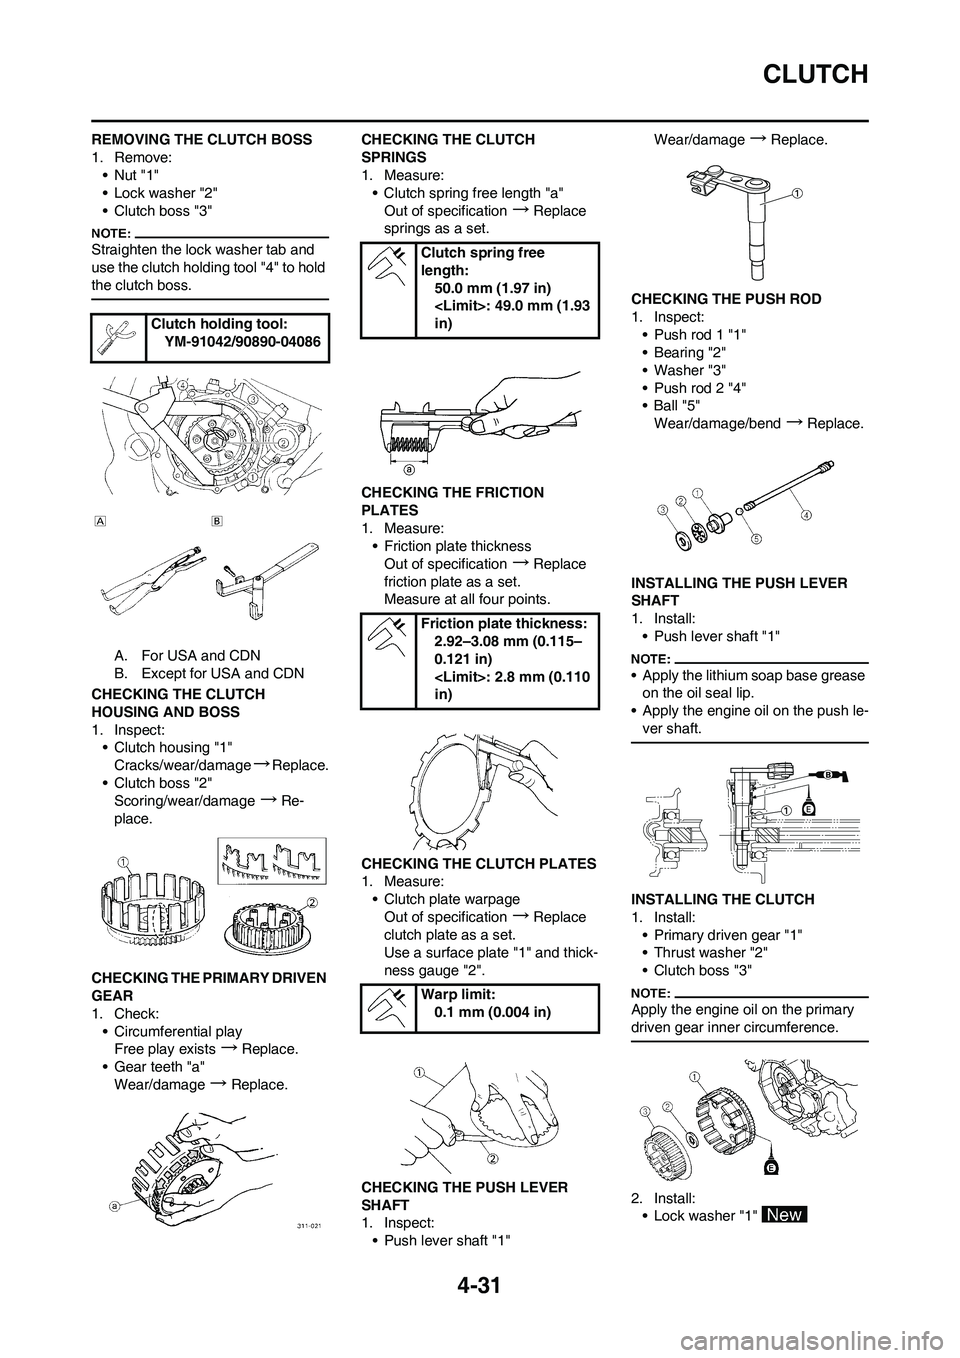 YAMAHA YZ450F 2008 User Guide 4-31
CLUTCH
REMOVING THE CLUTCH BOSS
1. Remove:
•Nut "1"
• Lock washer "2"
• Clutch boss "3"
Straighten the lock washer tab and 
use the clutch holding tool "4" to hold 
the clutch boss.
A. For 